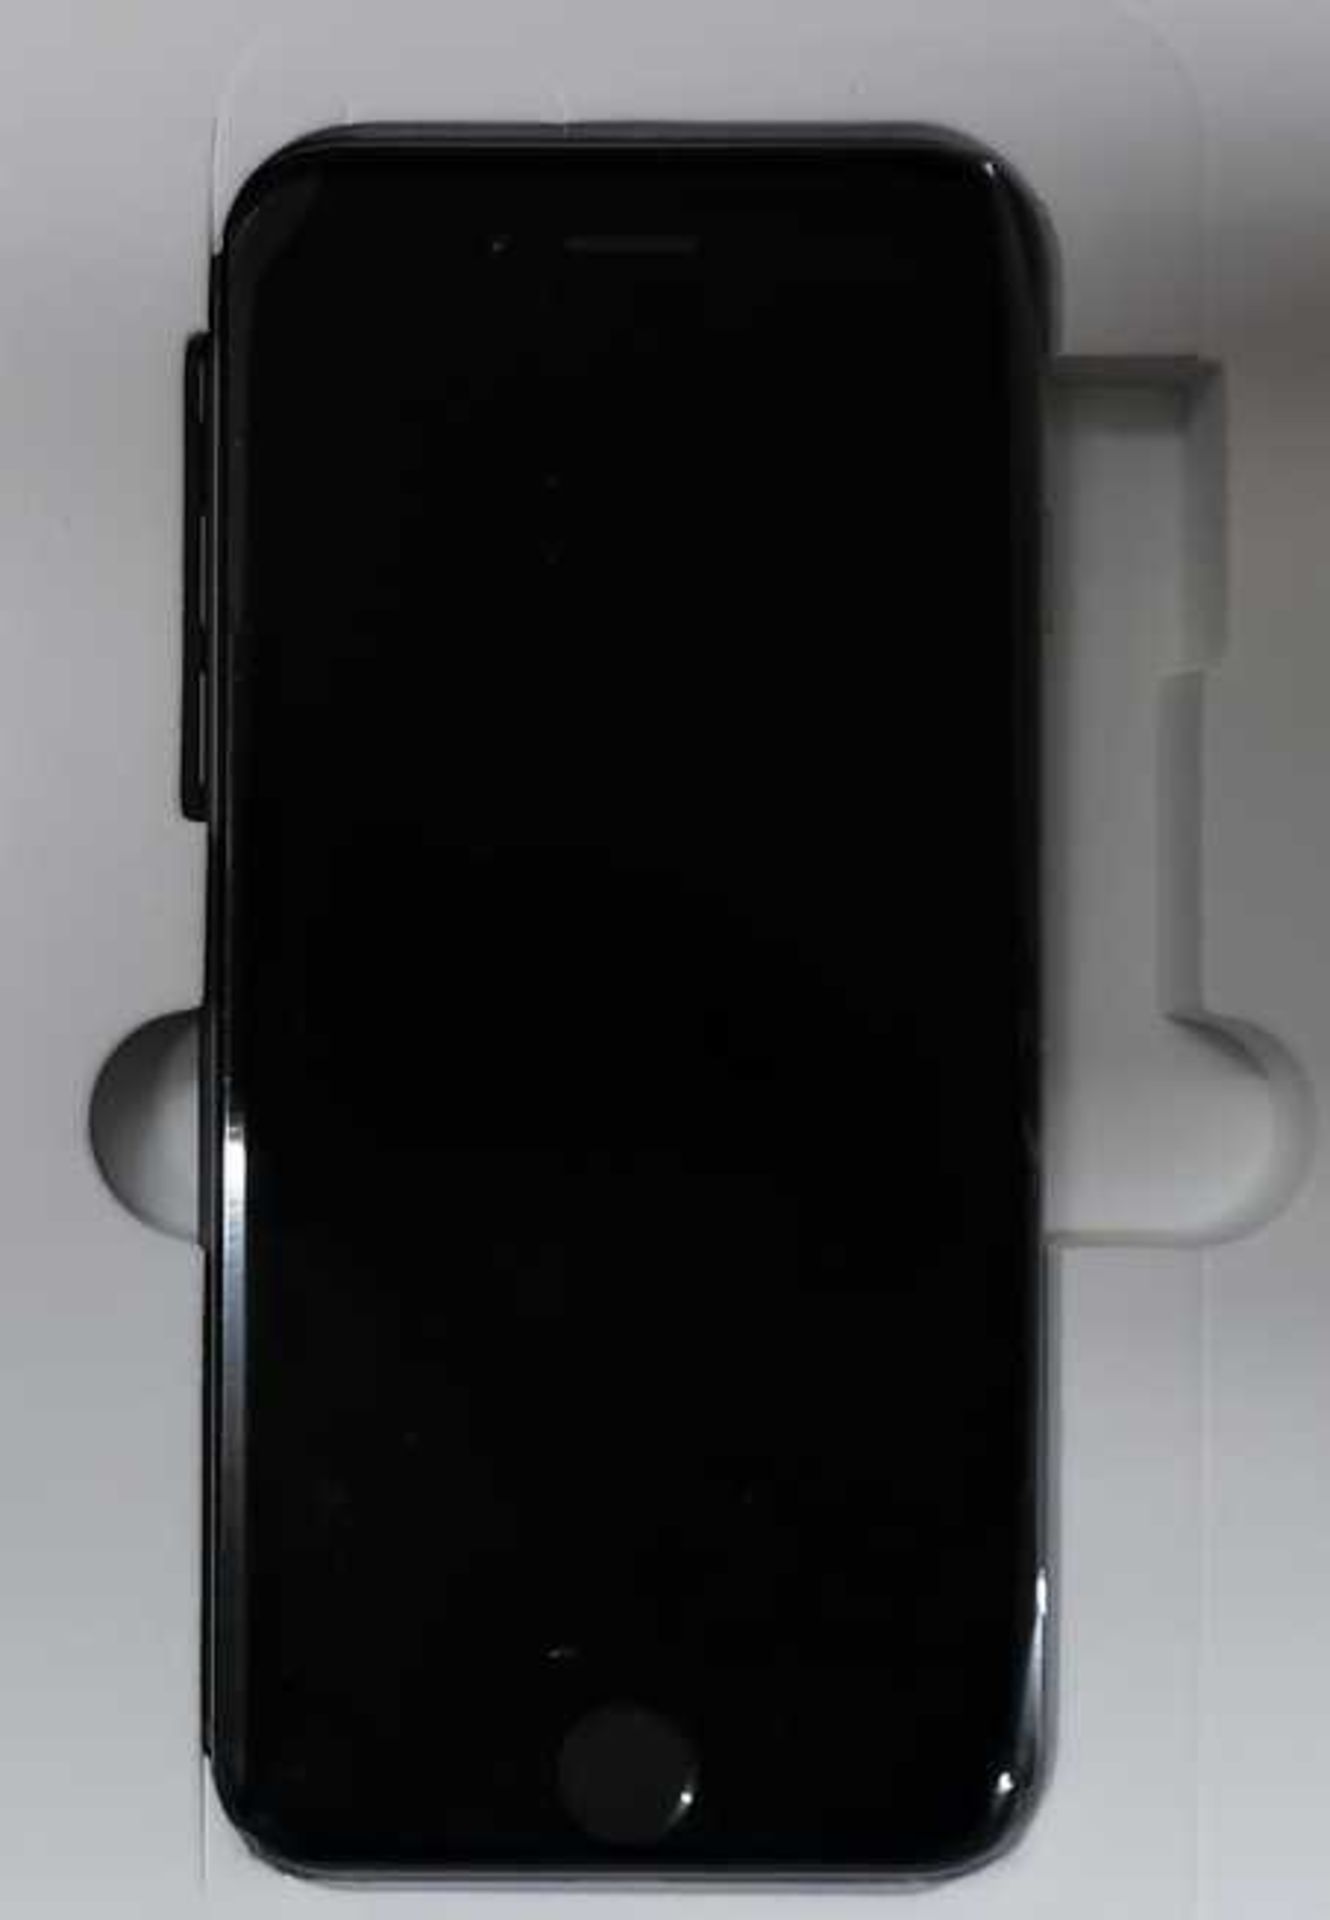 A refurbished Apple iPhone 6 A1586 16GB in Space Gray (IMEI:359298066226157)(No box or accessories